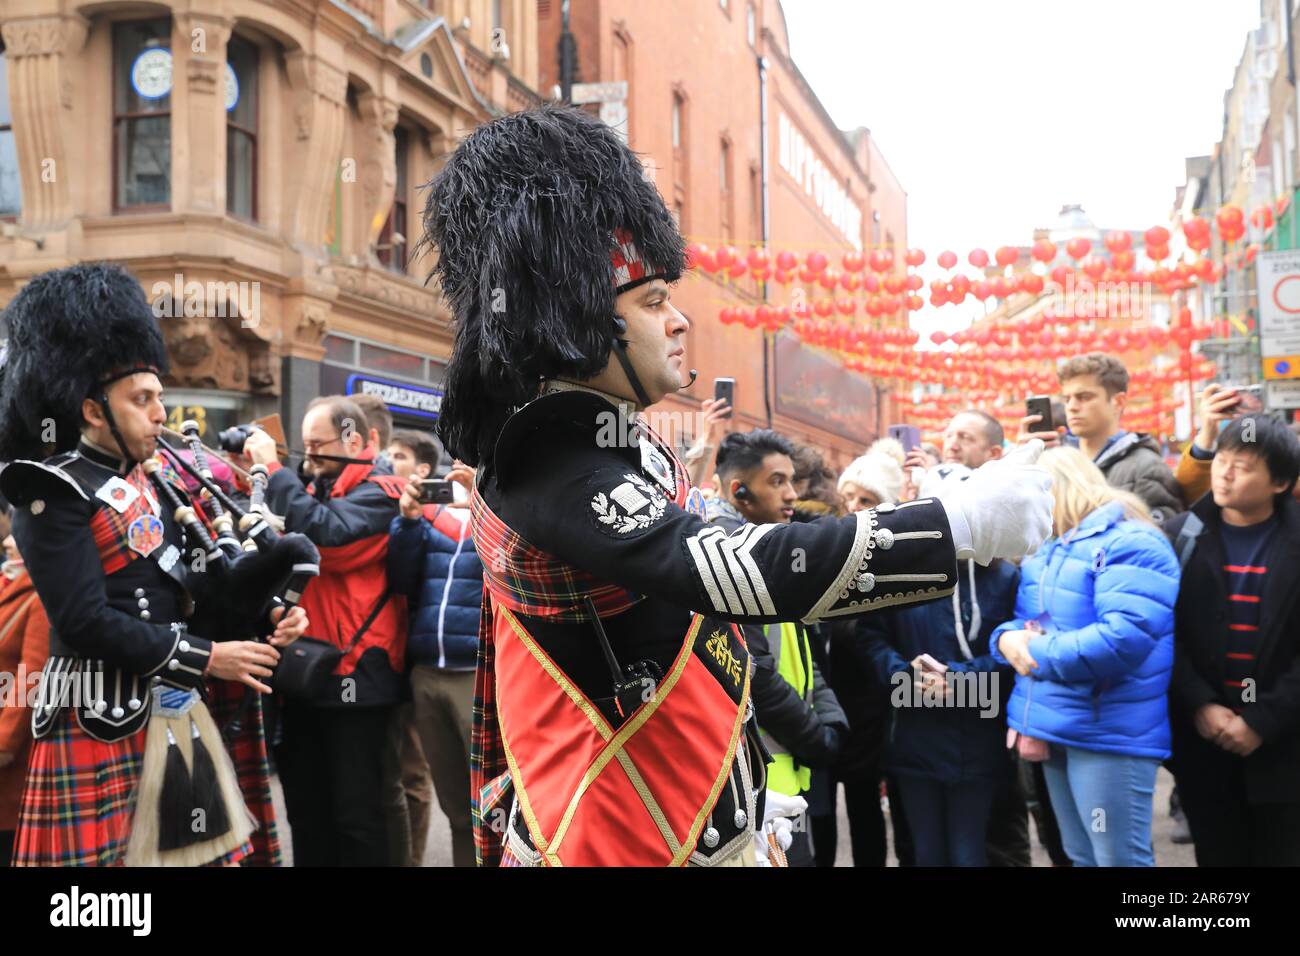 The unusual sight of the Shree Muktajeevan Pipe Band at the Chinese New Year 2020, being celebrated in London with the annual parade, bringing in the Year of the Rat. Stock Photo